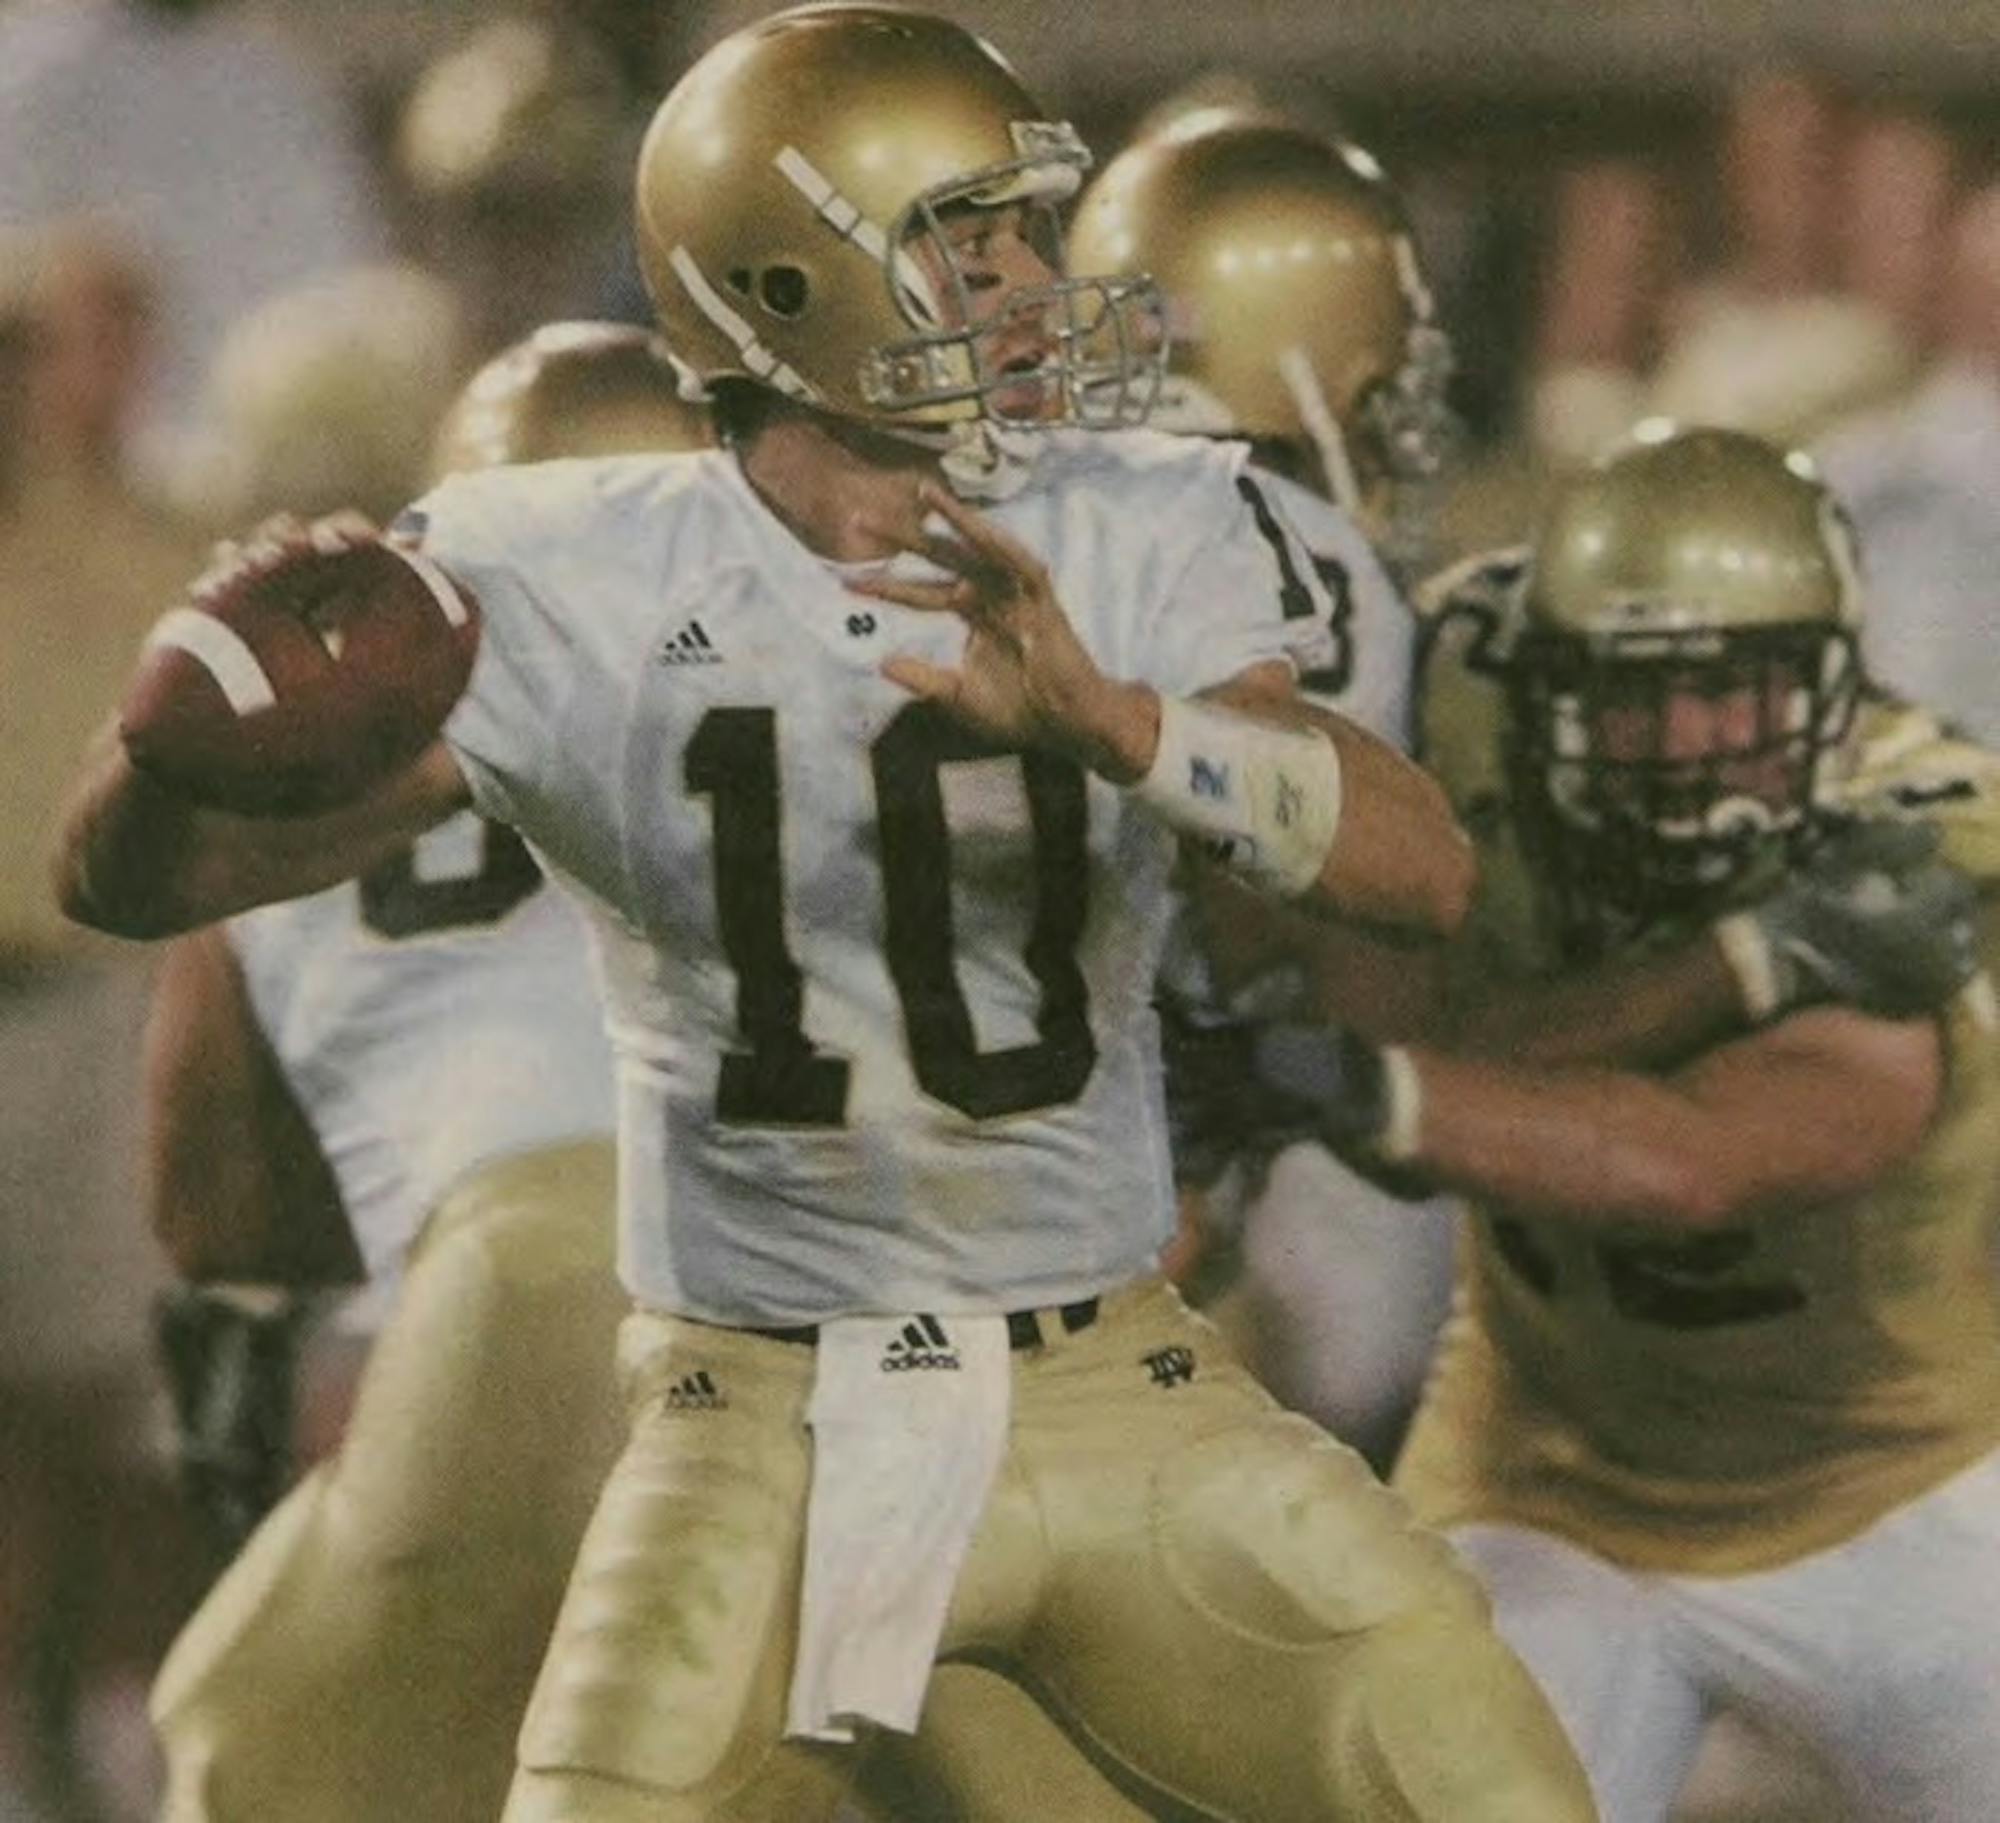 Brady Quinn drops back for a pass in a game against Georgia Teach on Sept. 2, 2006. He led the Irish to a 14-10 come from behind victory in the season opener of Charlie Weis’s second season.